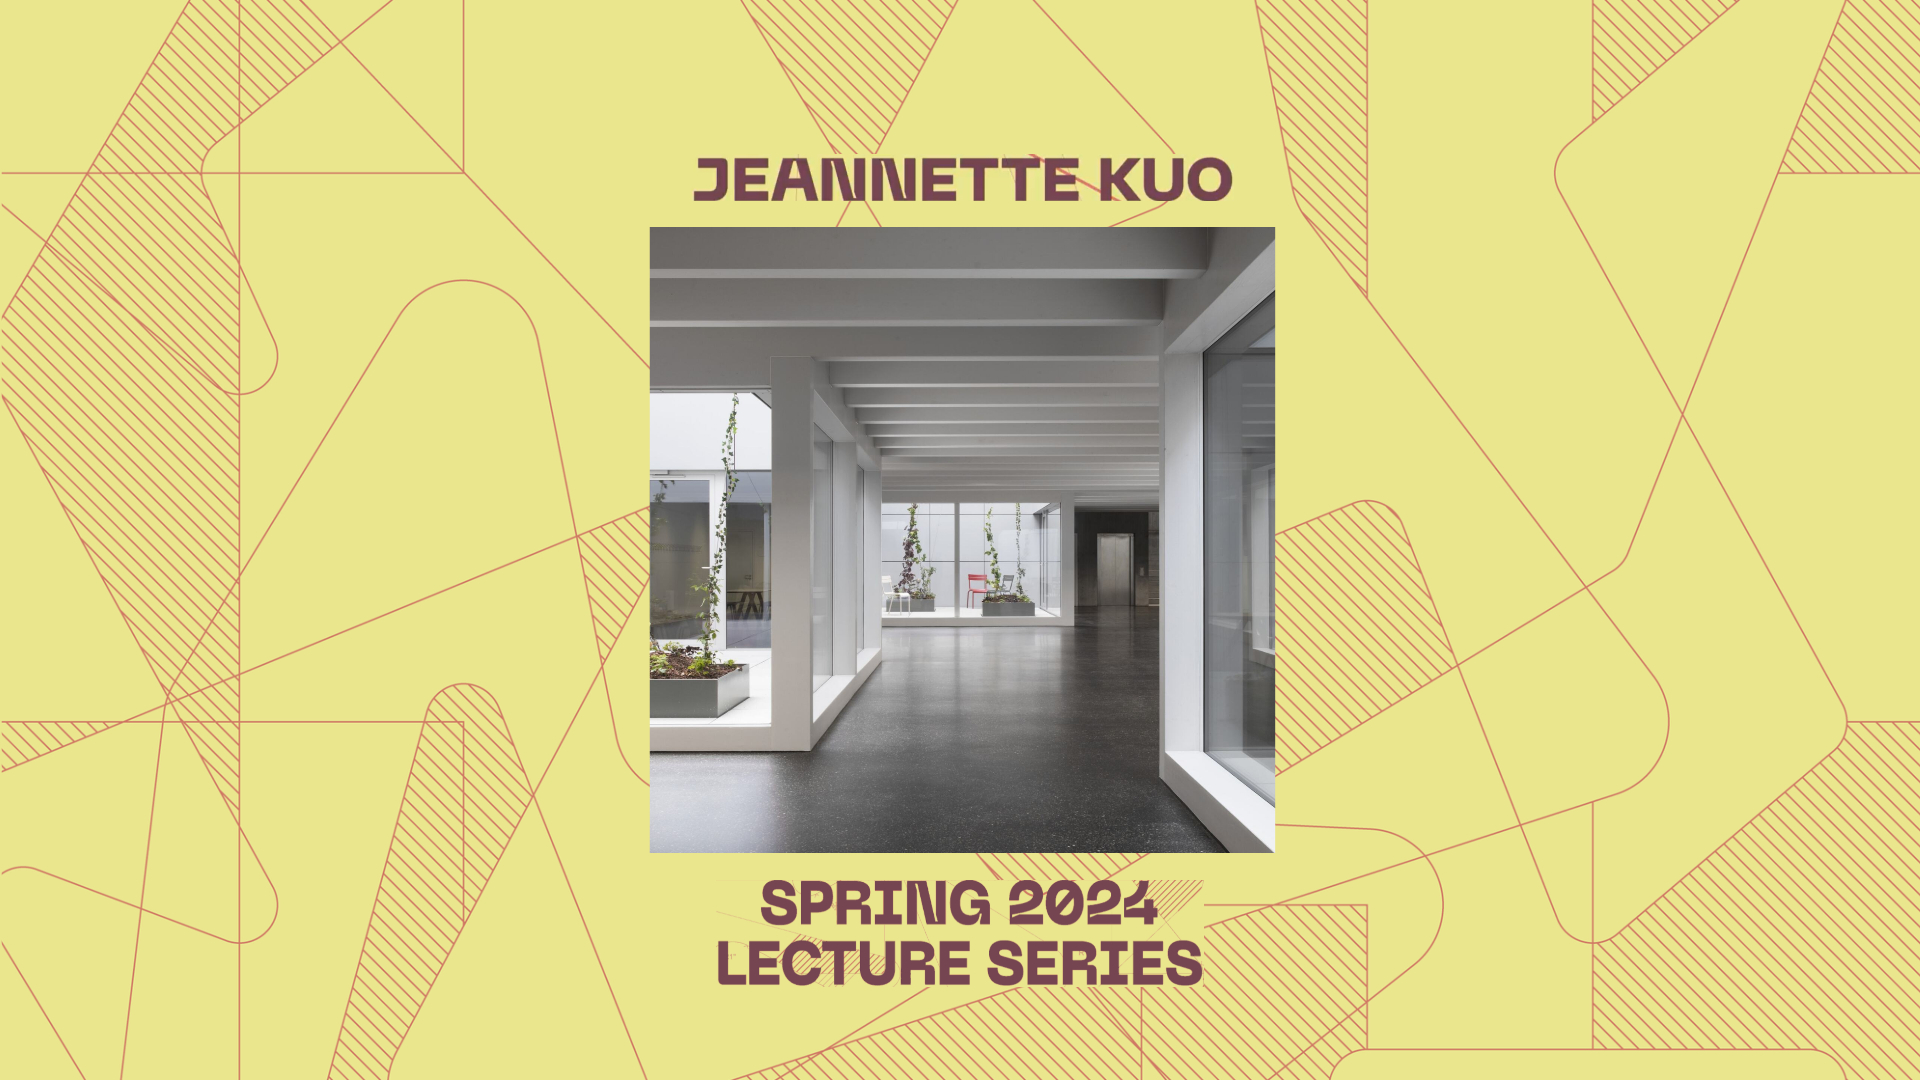 Lecture by Jeannette Kuo on February 19, 2024.